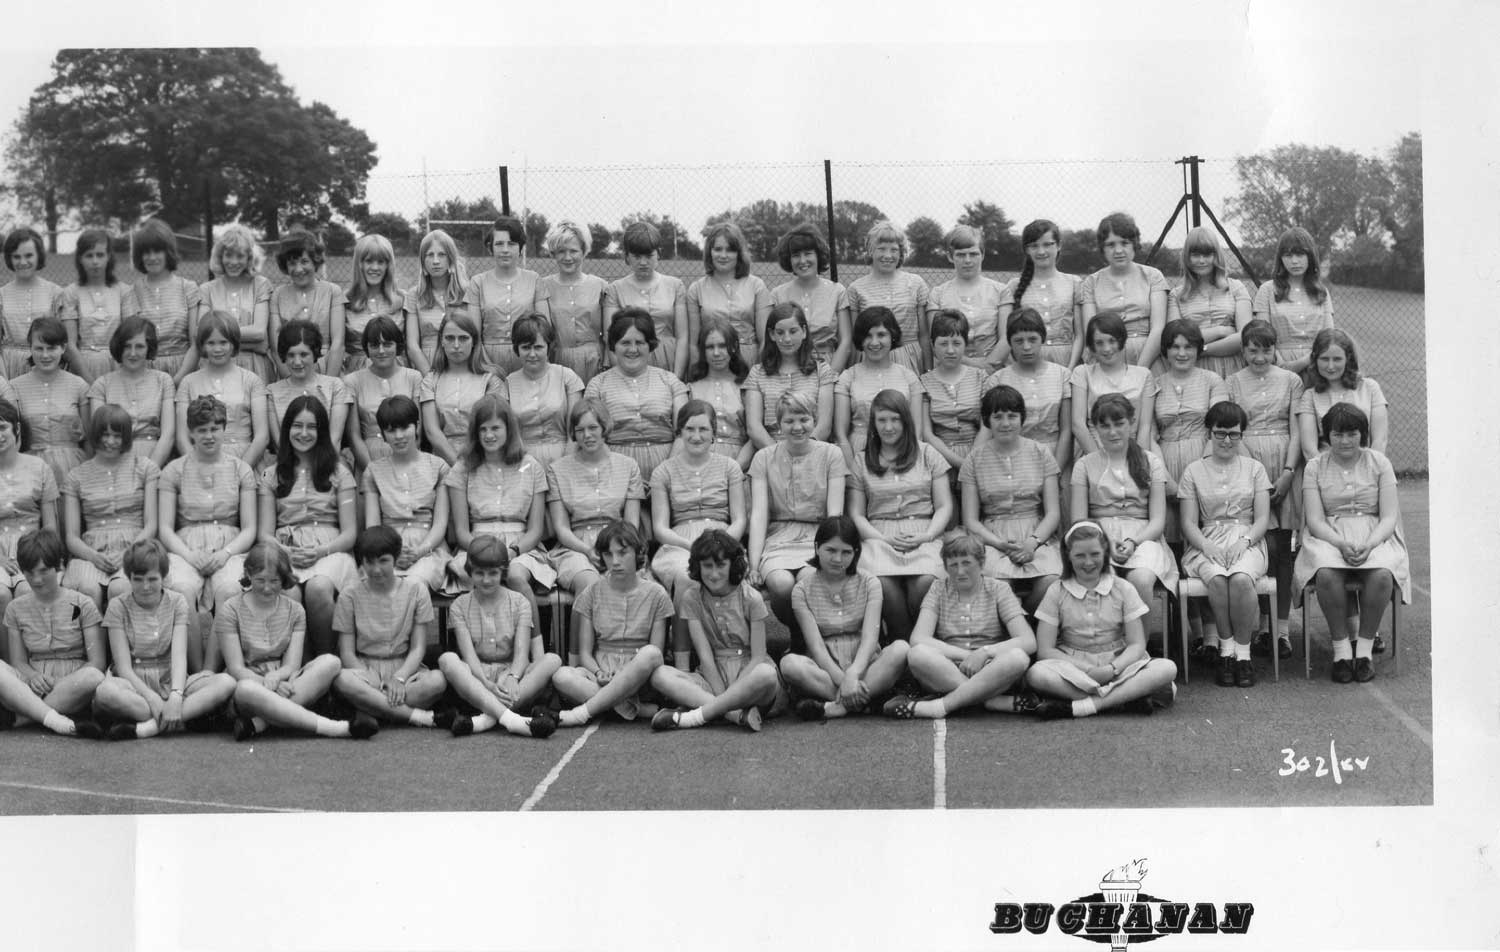 A photo of section1 of the Bells Grammar School photo from 1968 - Section 5